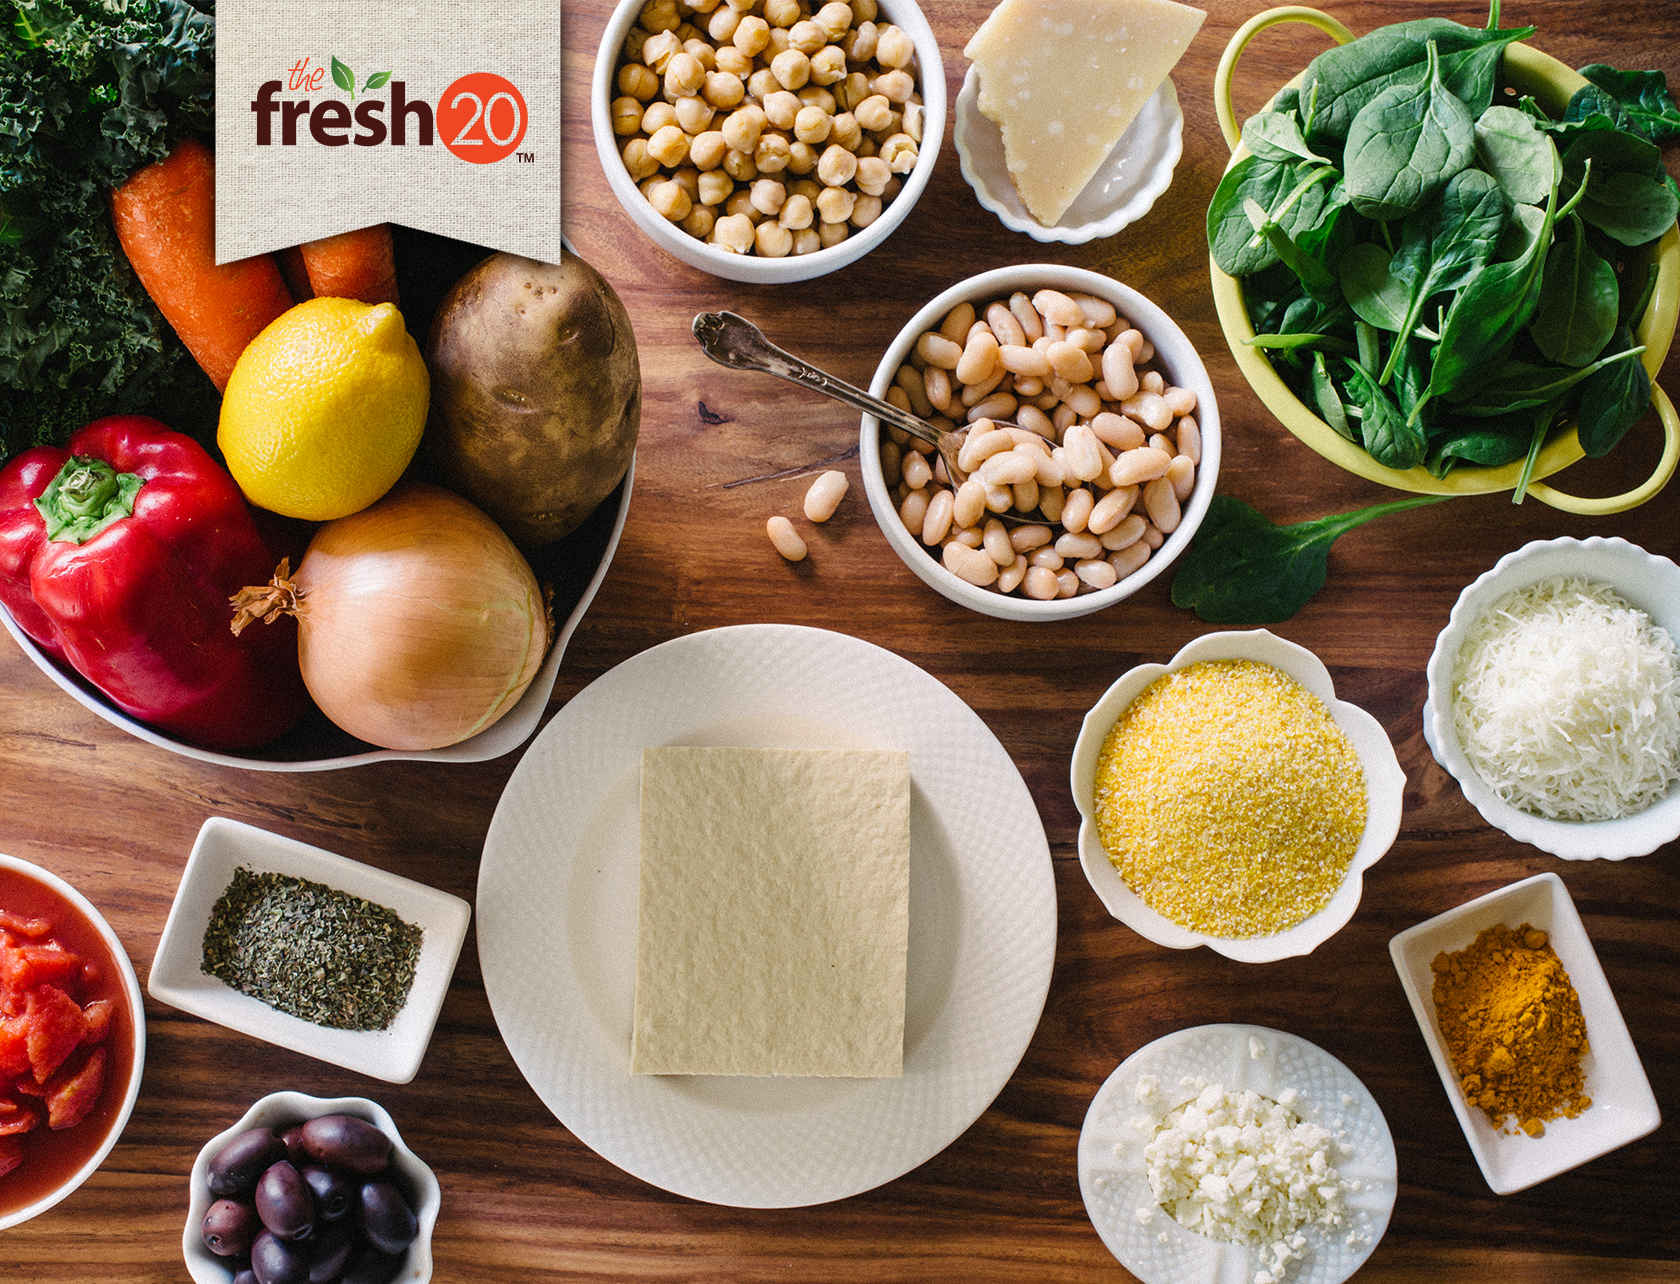 Sign up for FREE Sample Meal Plans from The Fresh 20!